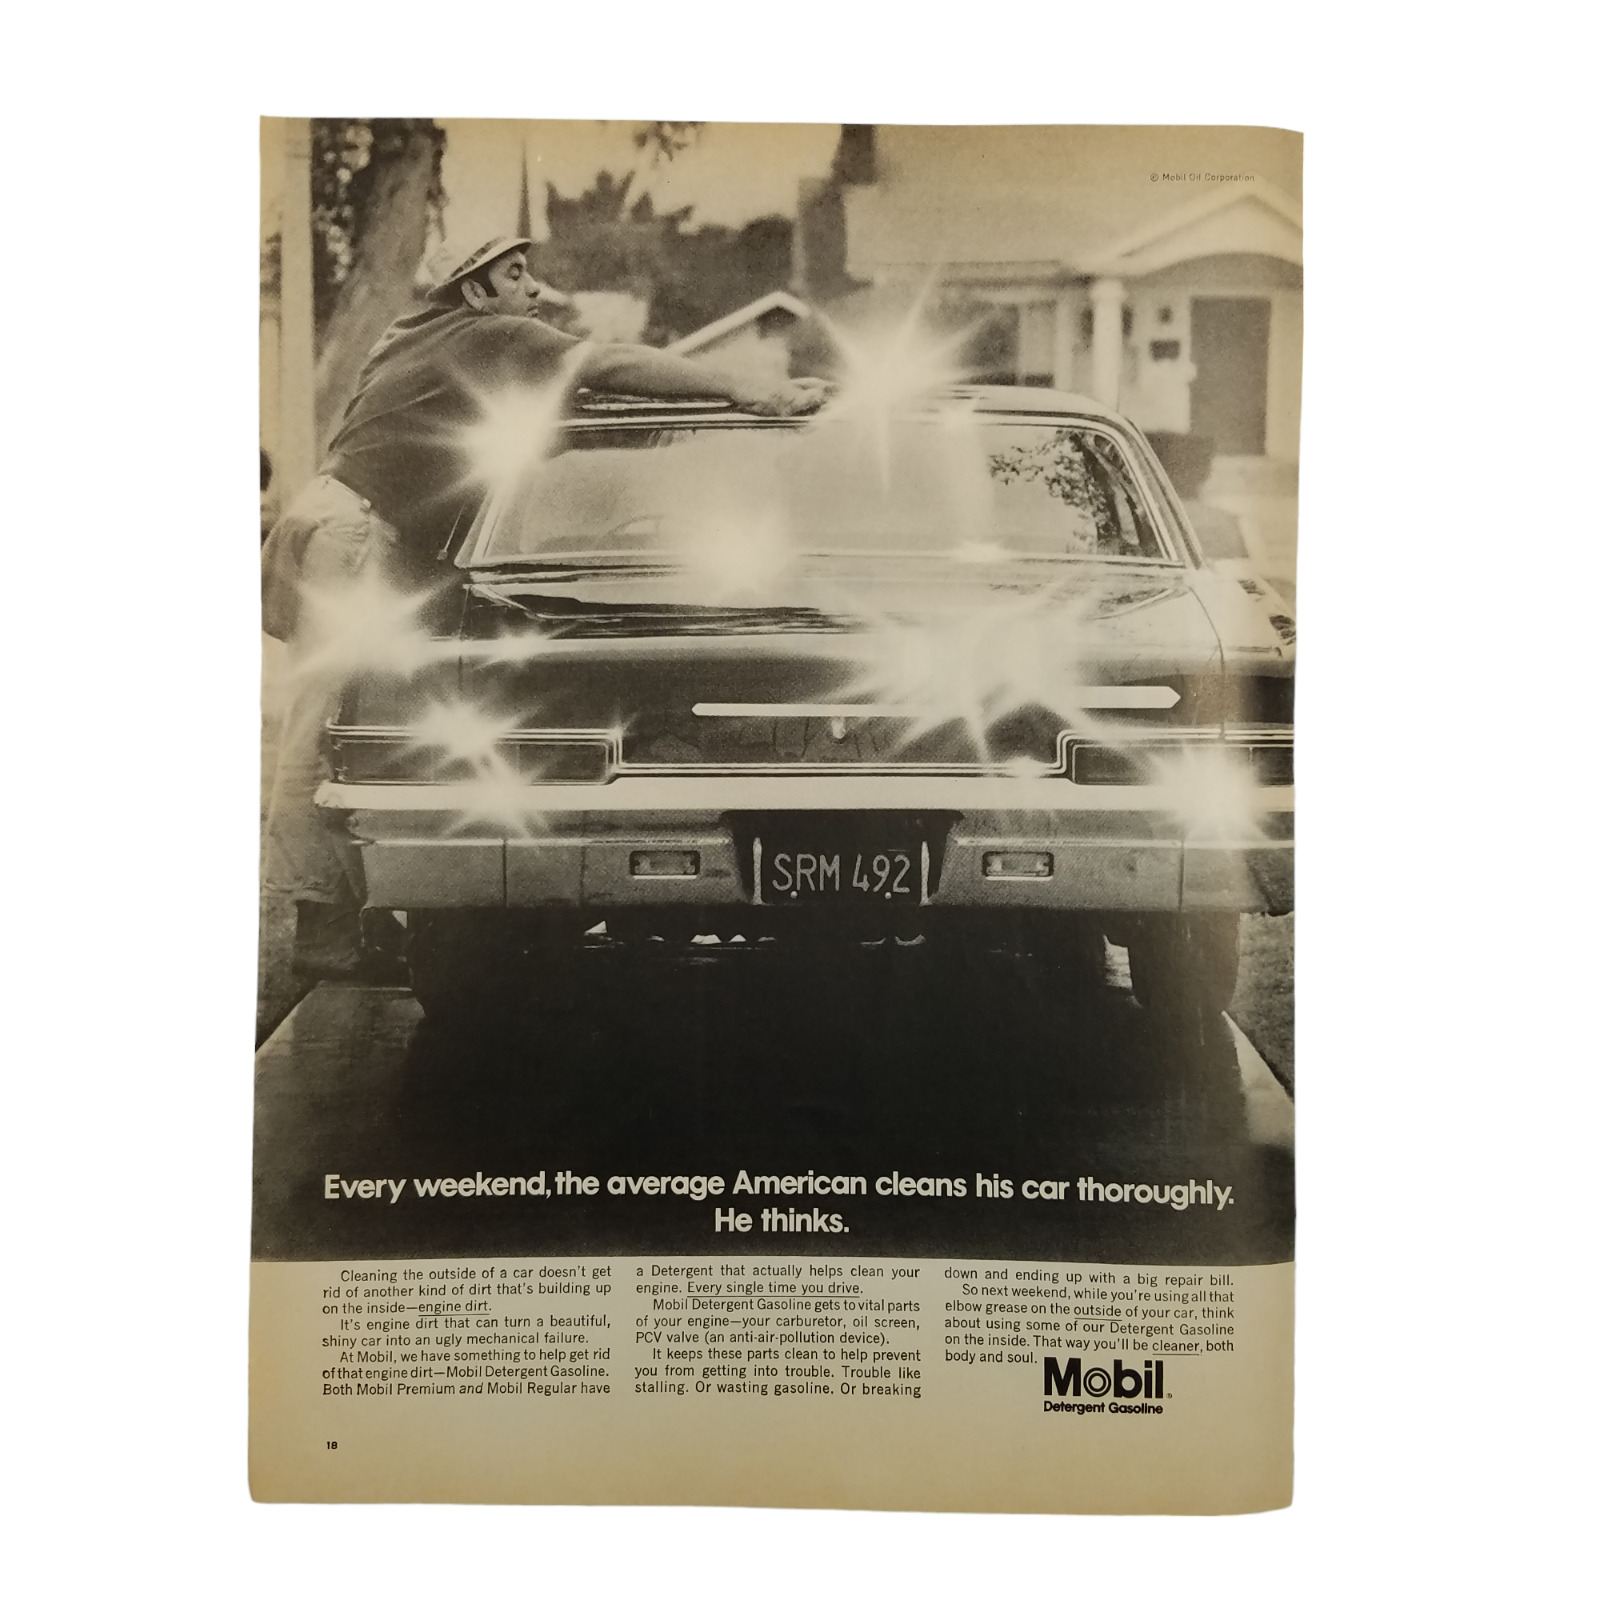 1968 Mobil Detergent Gasoline Vintage Print Ad Thinks He Cleans His Car Thorough